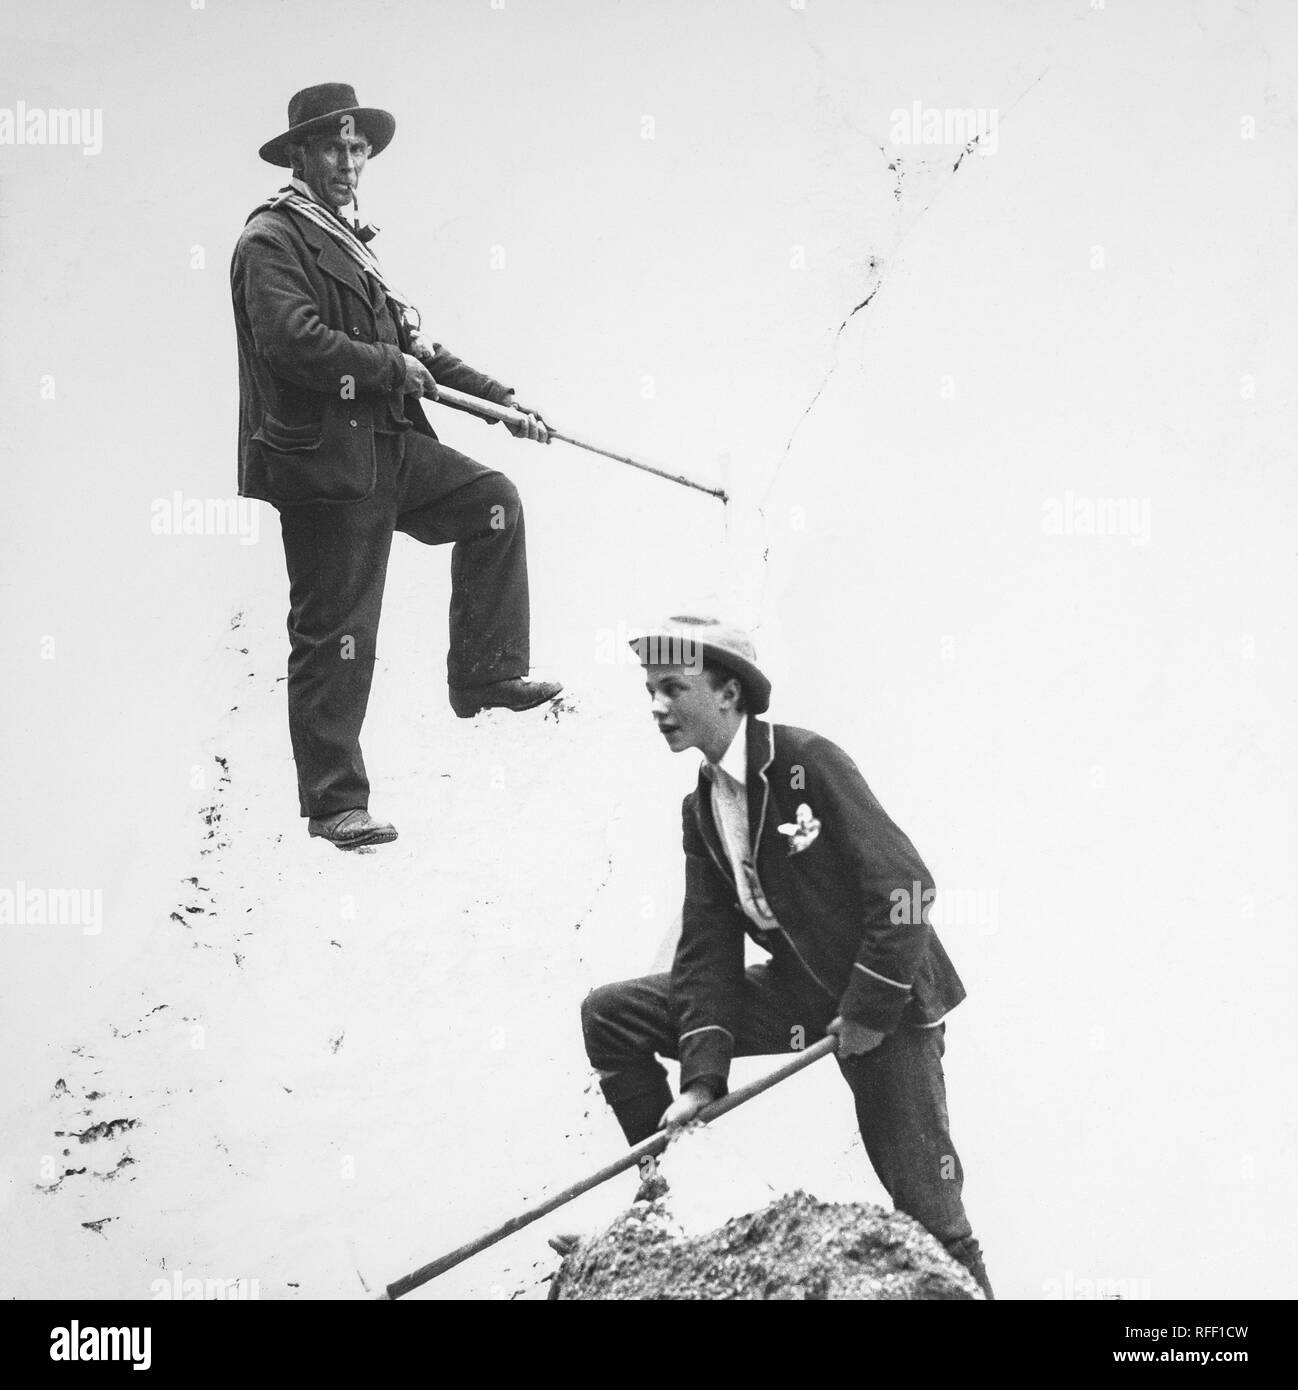 A late 19th century black and white photograph showing the famous Swiss mountain guide, Peter Kaufmann. Peter Kaufmann (January 17, 1858, in Grindelwald - October 14, 1924, in Grindelwald, at age 66) was a Swiss mountain guide during the Silver Age of Alpinism (1865-1882) and the early twentieth century, who guided amateurs, experienced climbers, and several notables across glaciers, over mountain passes, and to the summits in the Swiss Alps, the Canadian Rockies, and the Selkirks. A younger male can be seen on the snow slope just below him. Stock Photo